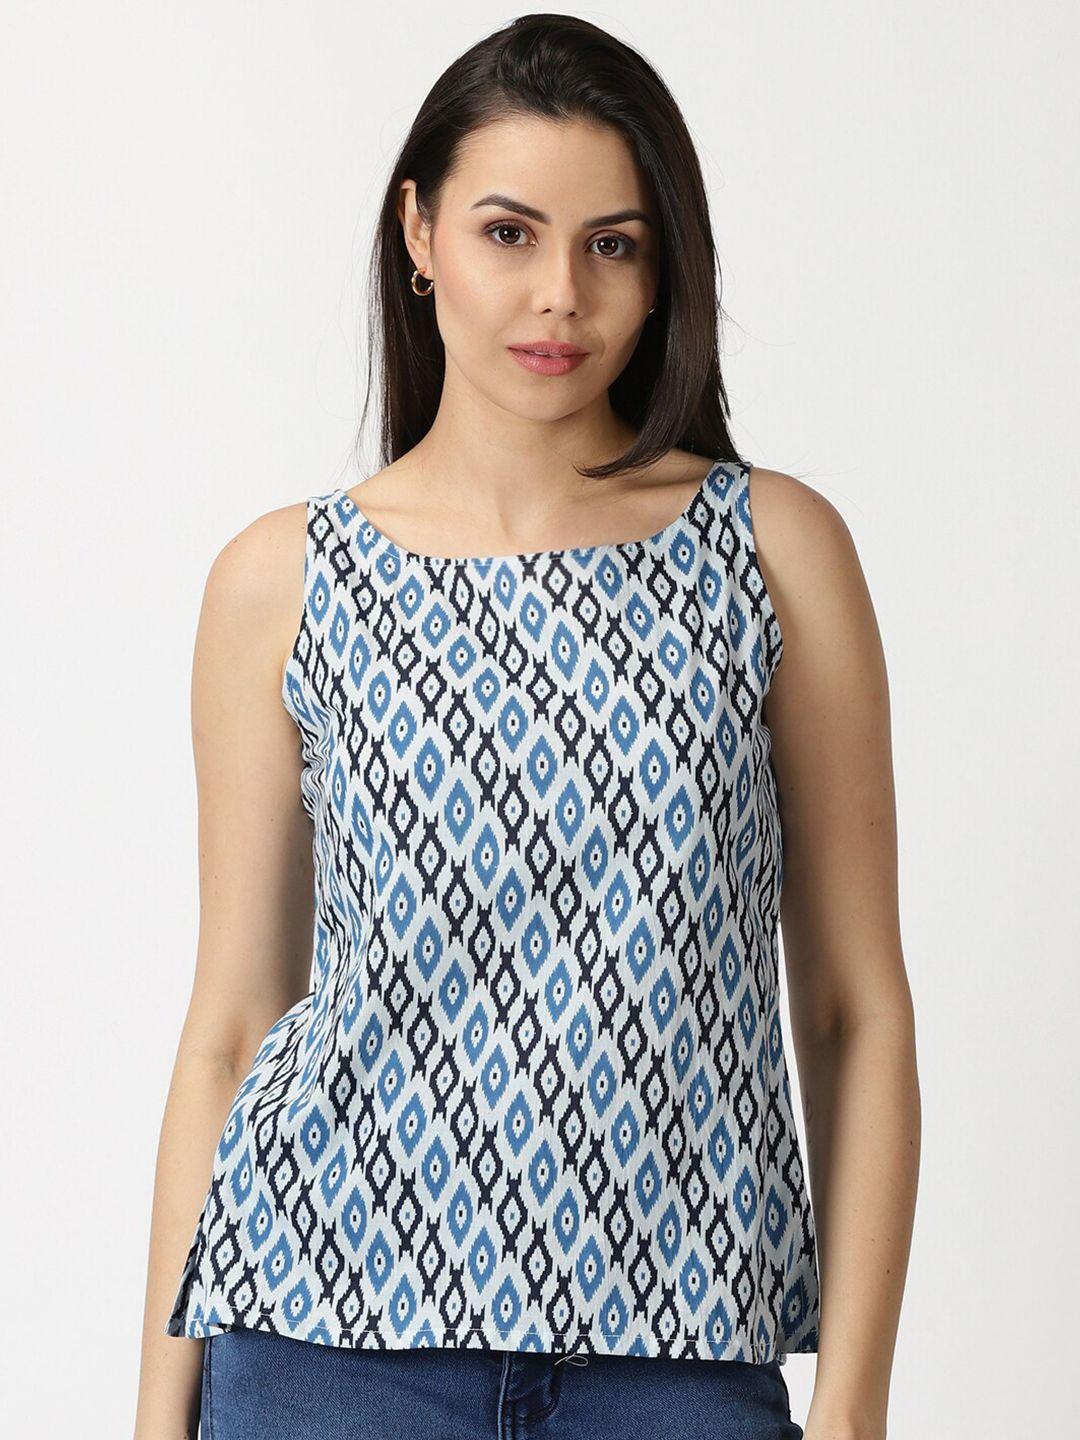 saffron threads geometric printed boat neck styled back cotton top